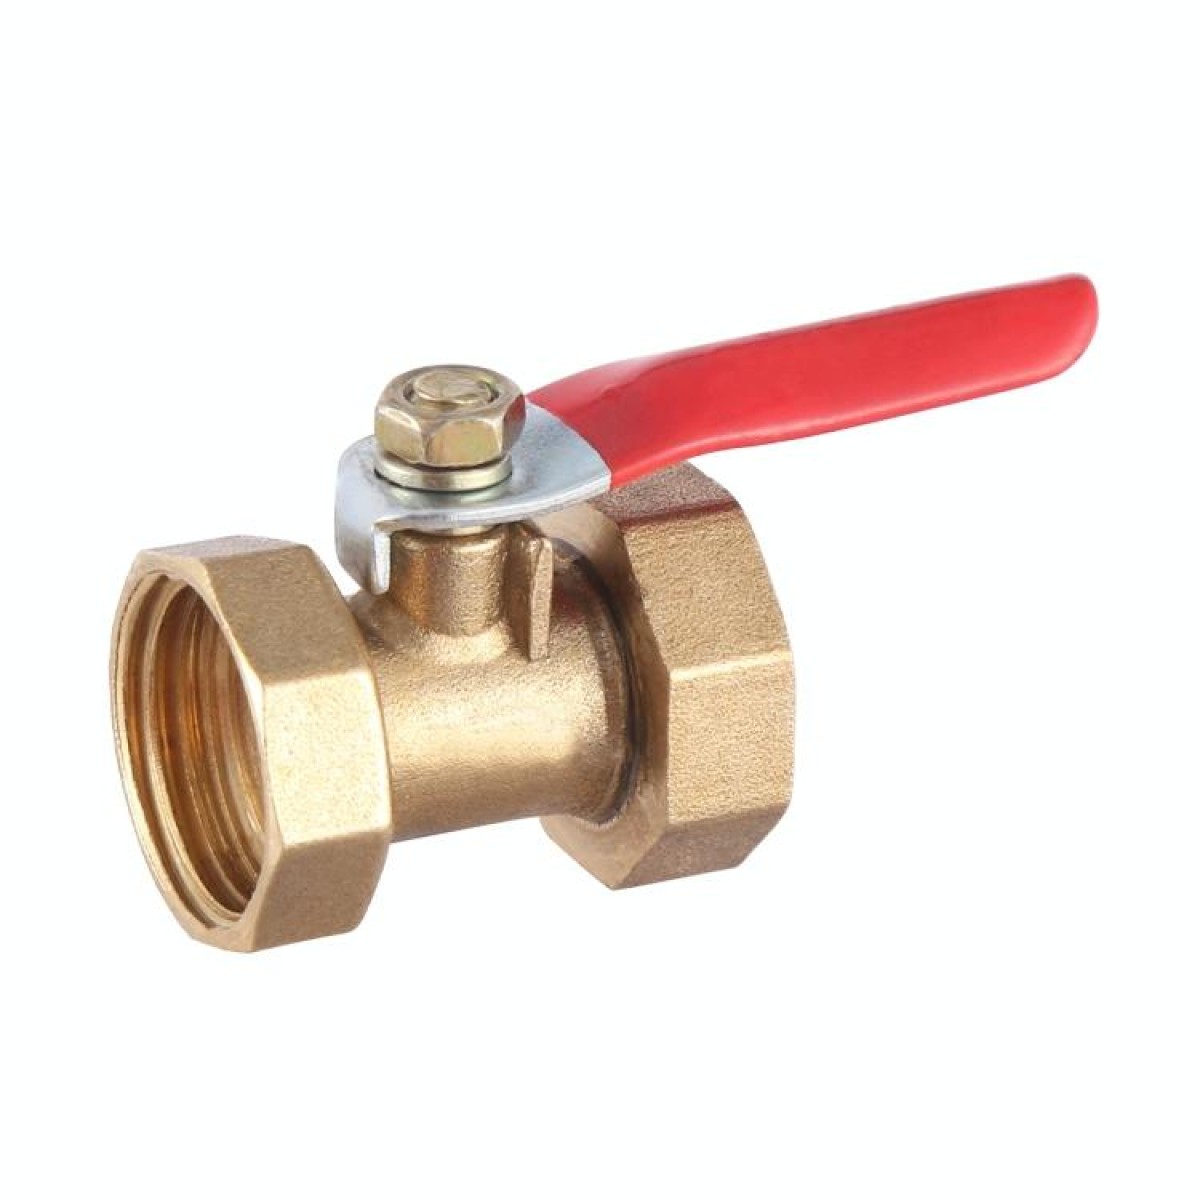 LAIZE Pneumatic Hose Connector Copper Ball Valve, Specification:Double Inside 4 1/2 inch